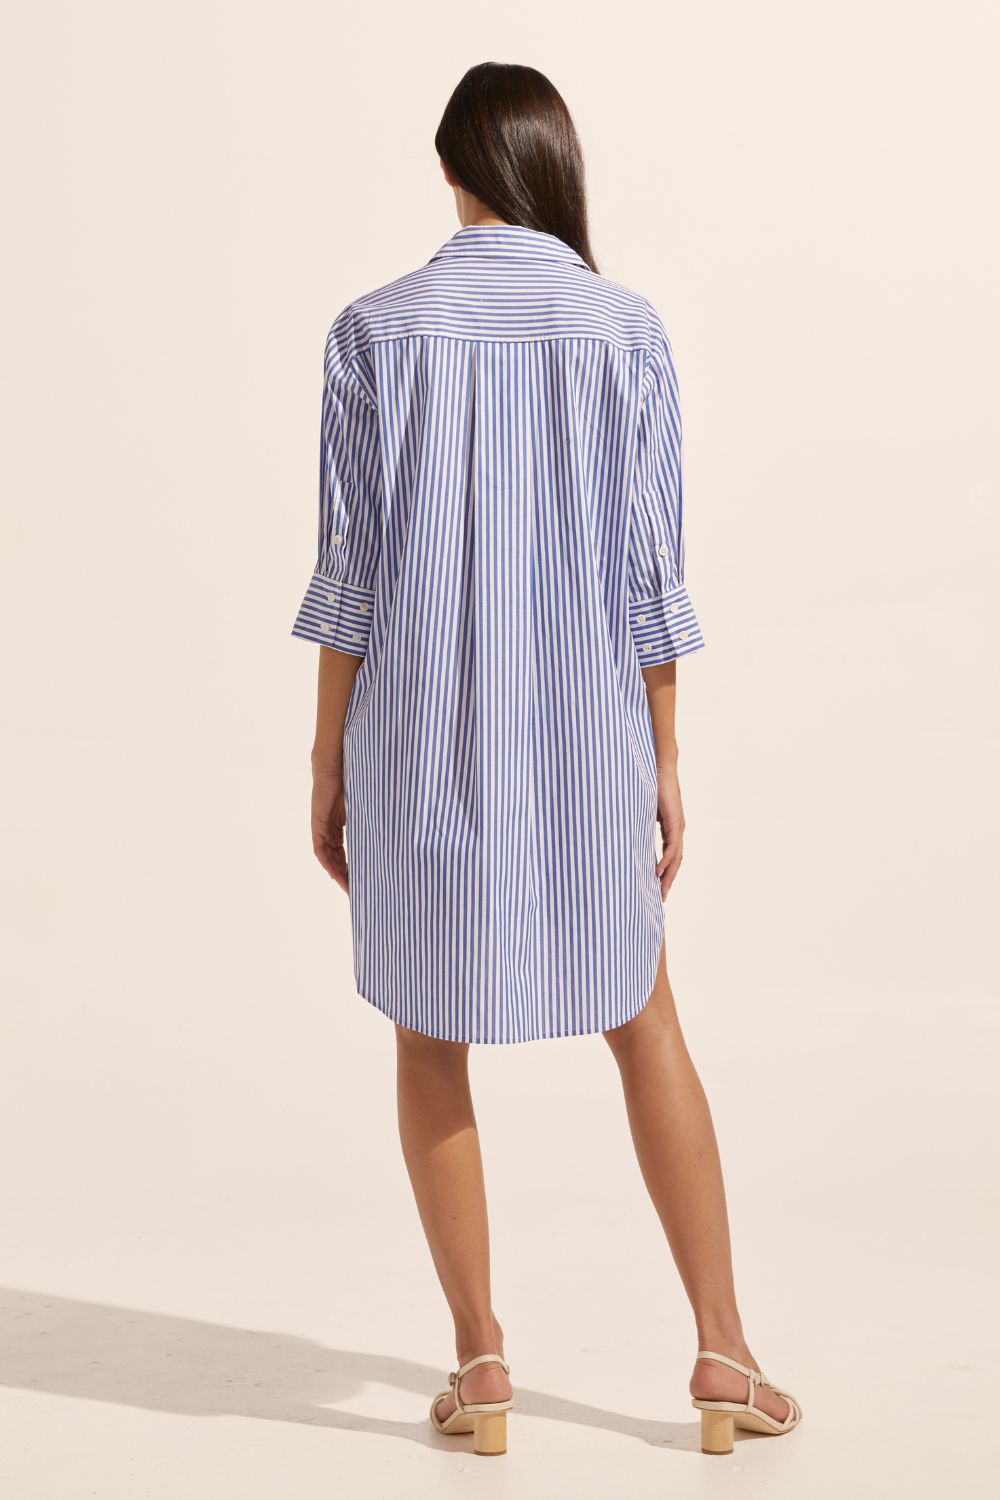 blue and white stripe, mid length sleeve, oversized patch pockets, high-low hemline, buttons down centre, crisp collar, dress, back image